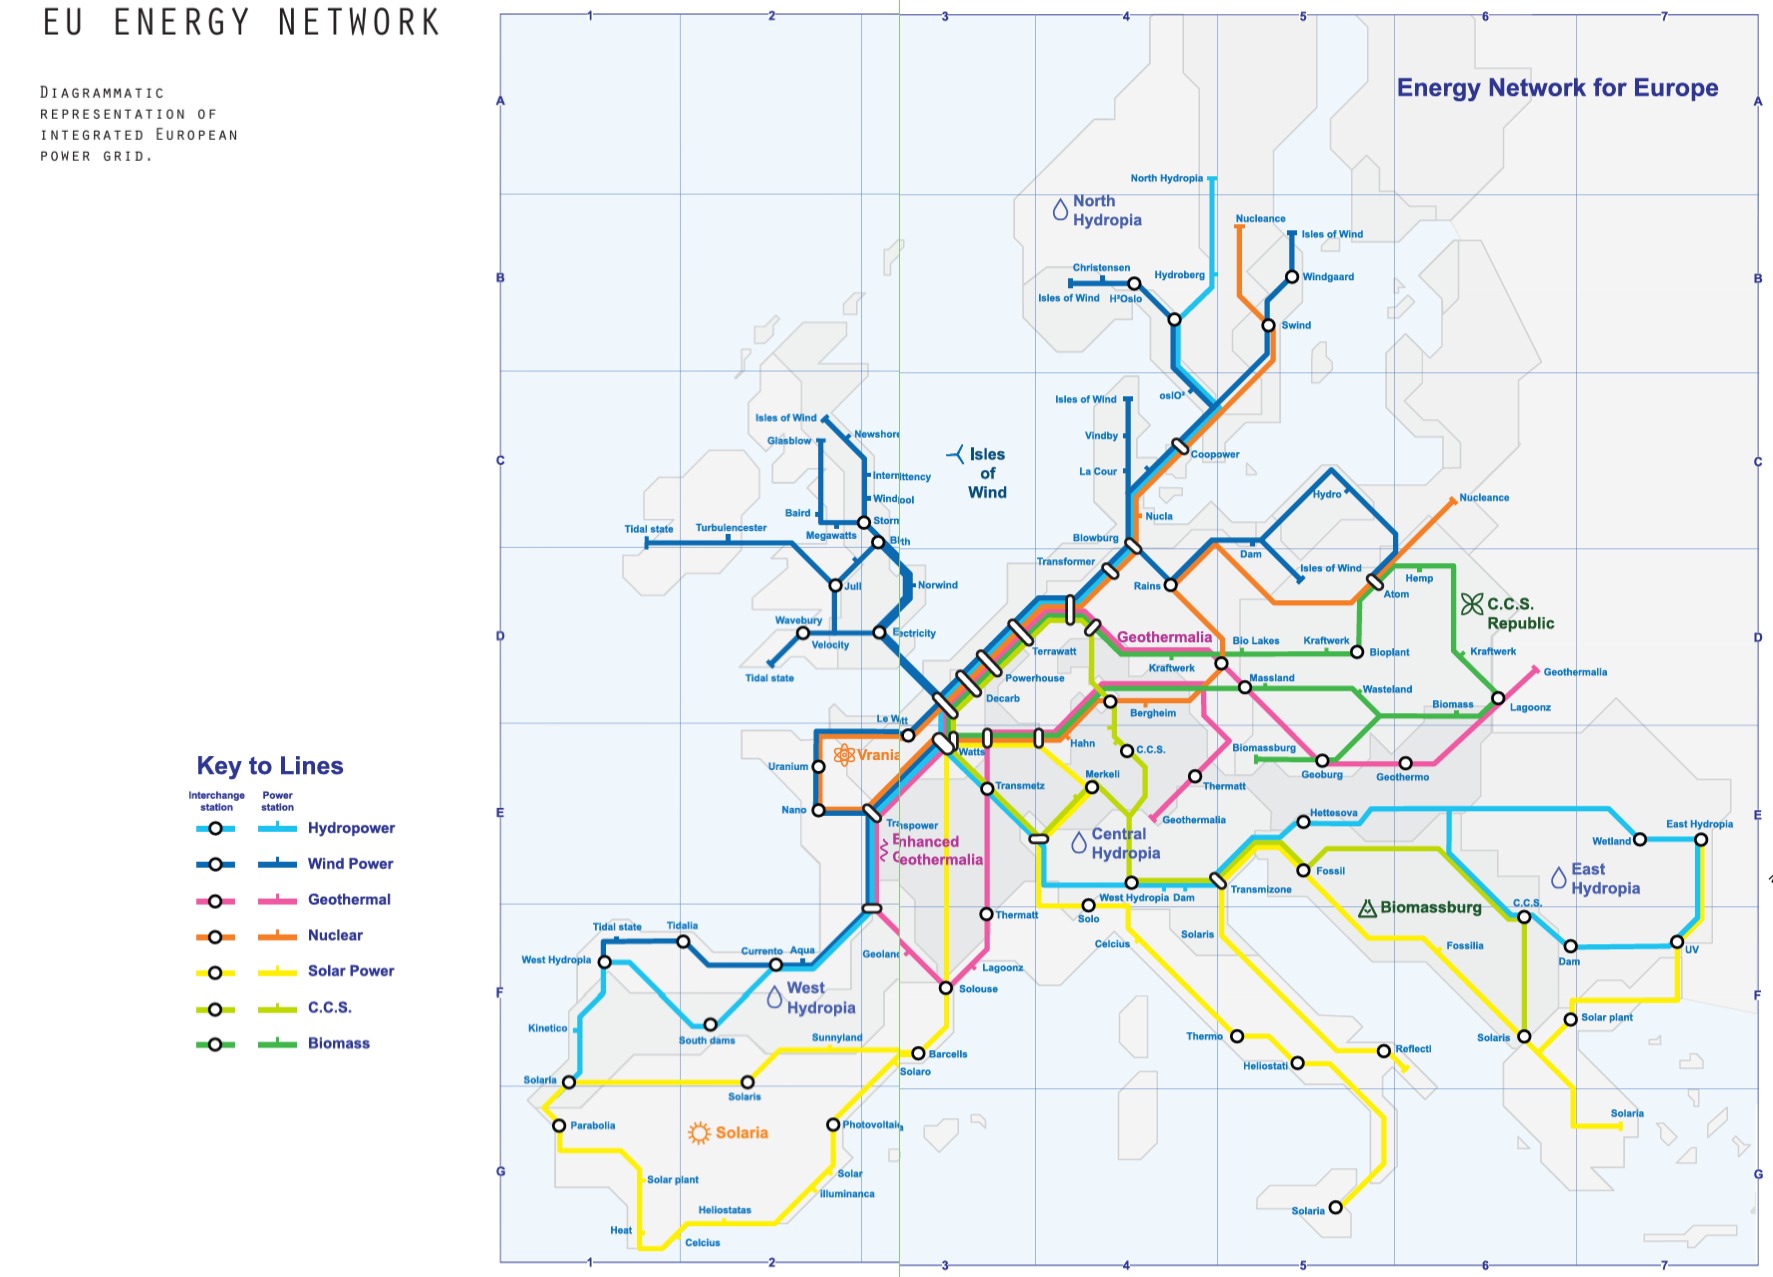 Map of the eu energy network, depicting various energy source lines such as nuclear, gas, coal, and renewables across european countries.